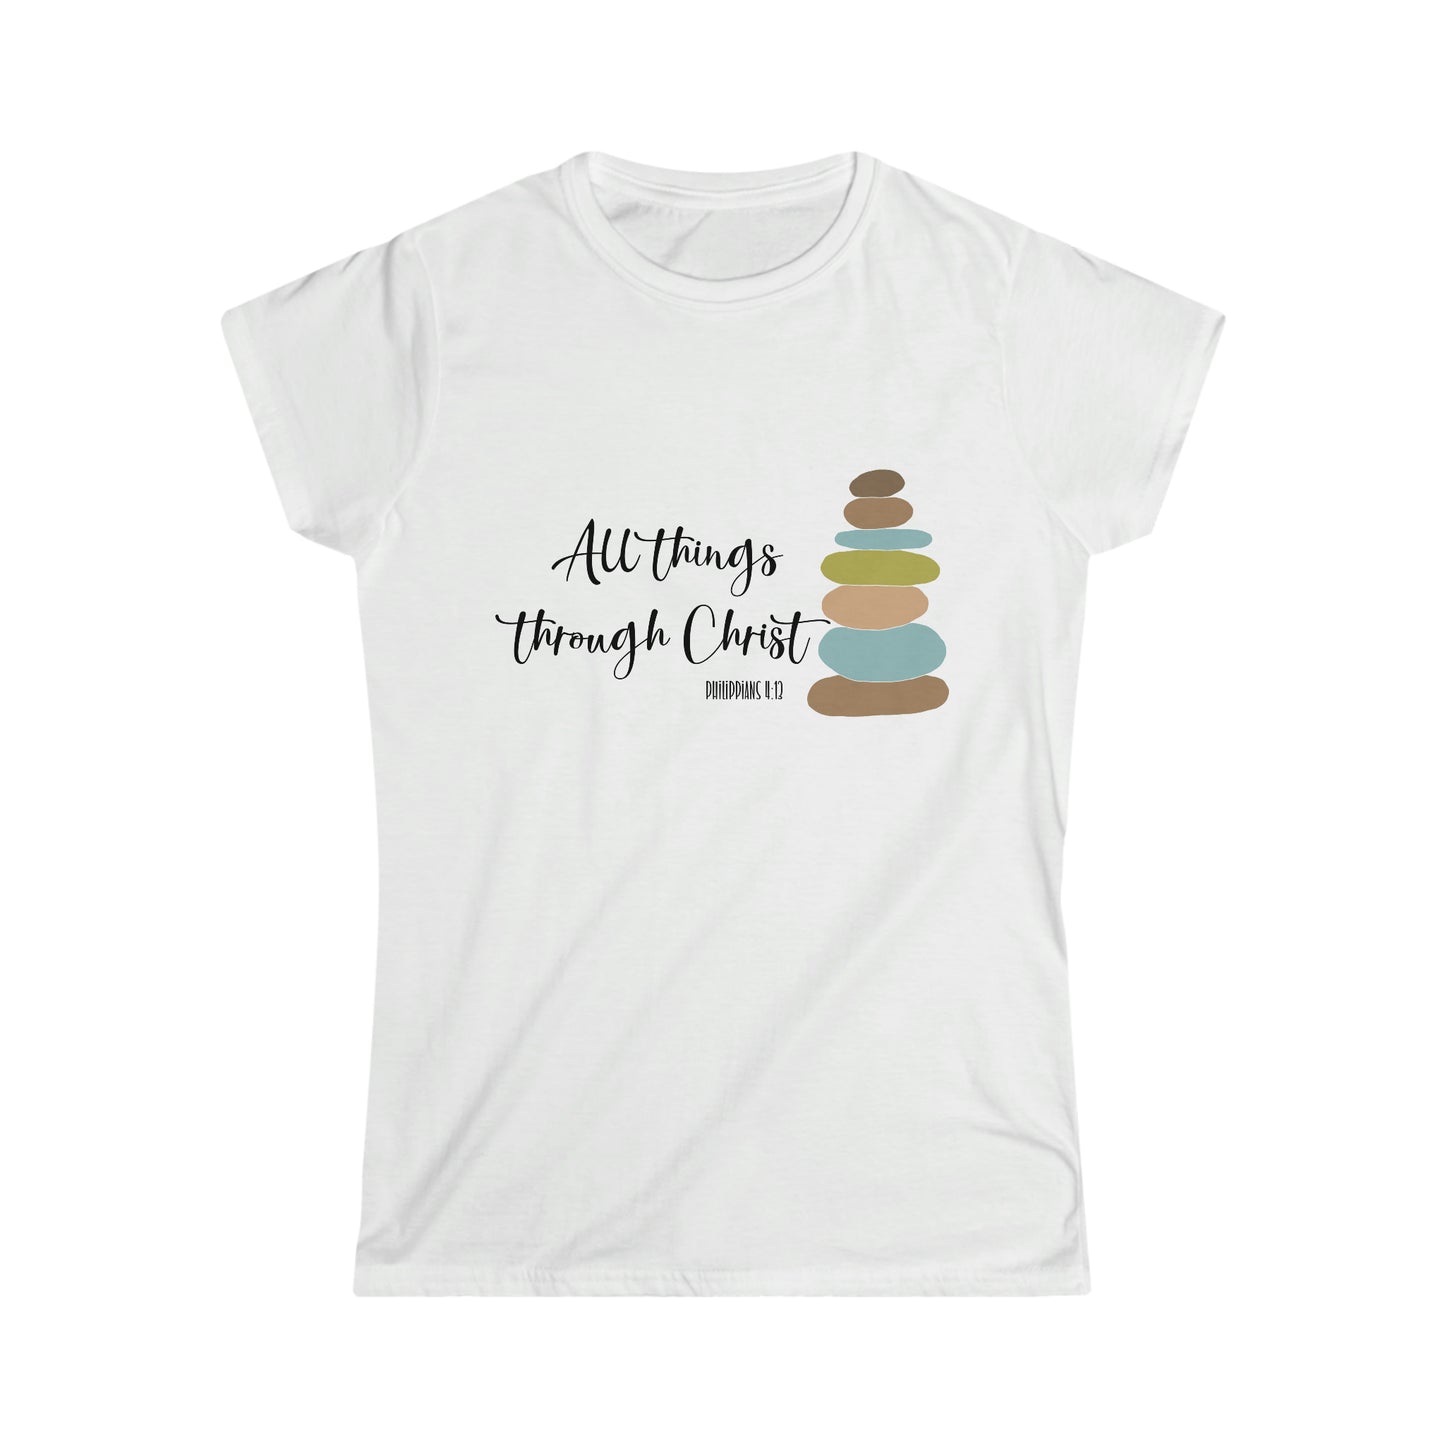 Women's Softstyle Tee, All Things In Christ, I Can Do All Things Through Christ with Cairn, Philippians 4:13